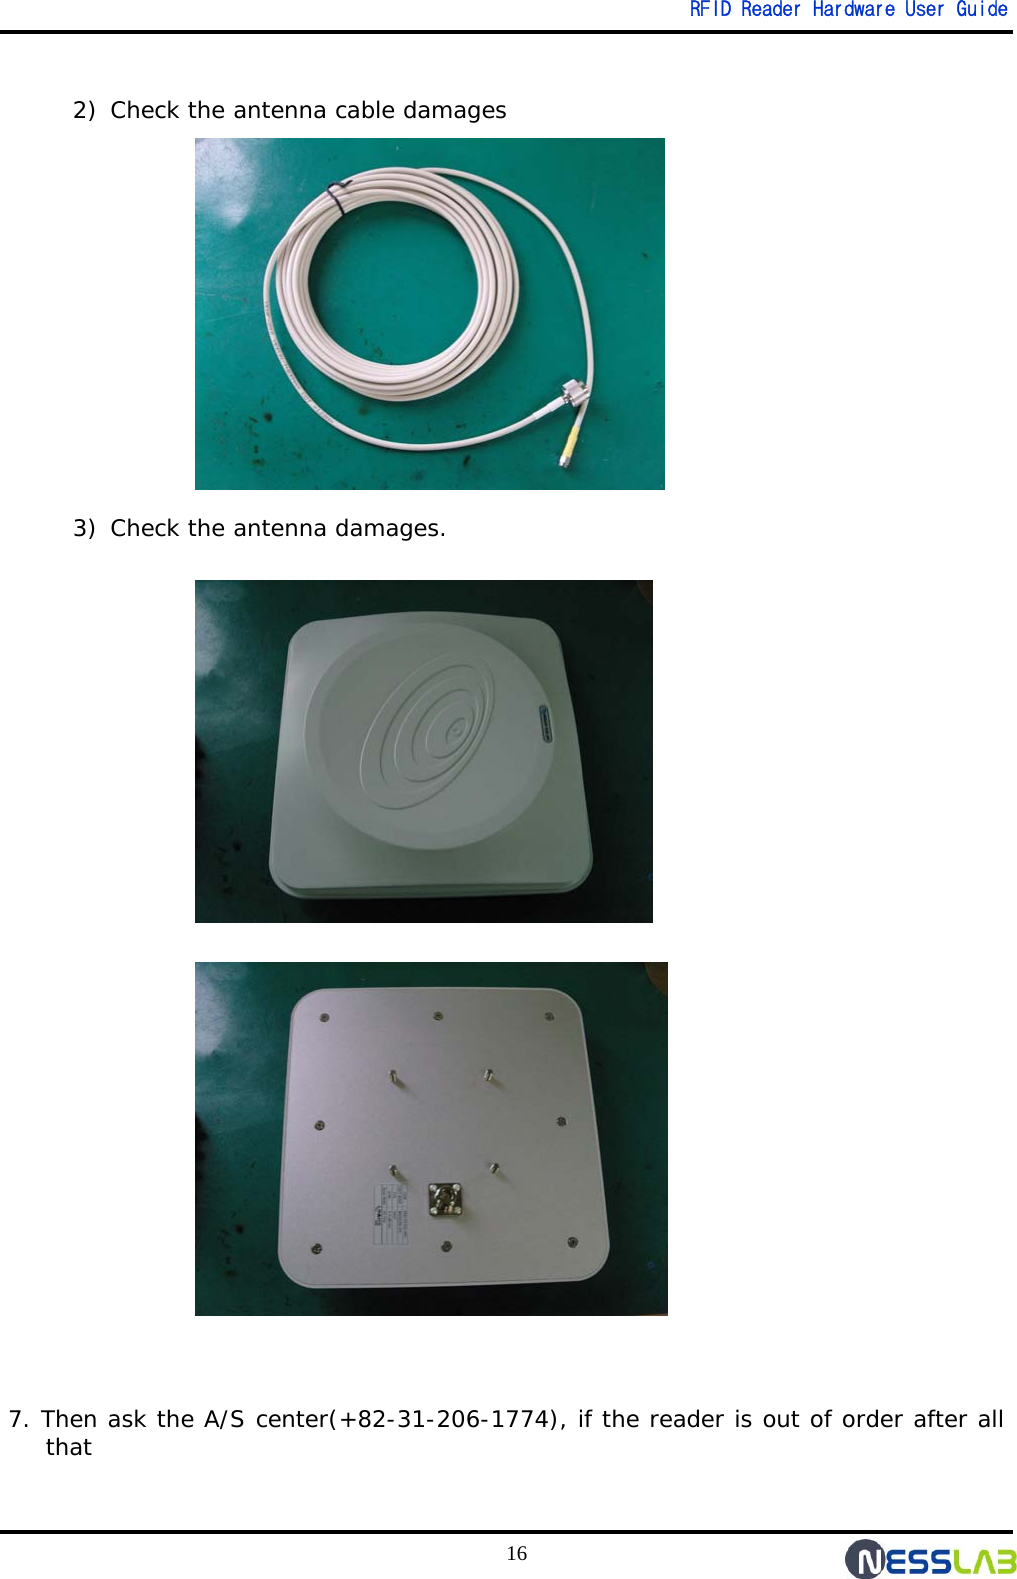   RFID Reader Hardware User Guide 16  2) Check the antenna cable damages                                                       3) Check the antenna damages.                                 7. Then ask the A/S center(+82-31-206-1774), if the reader is out of order after all that  